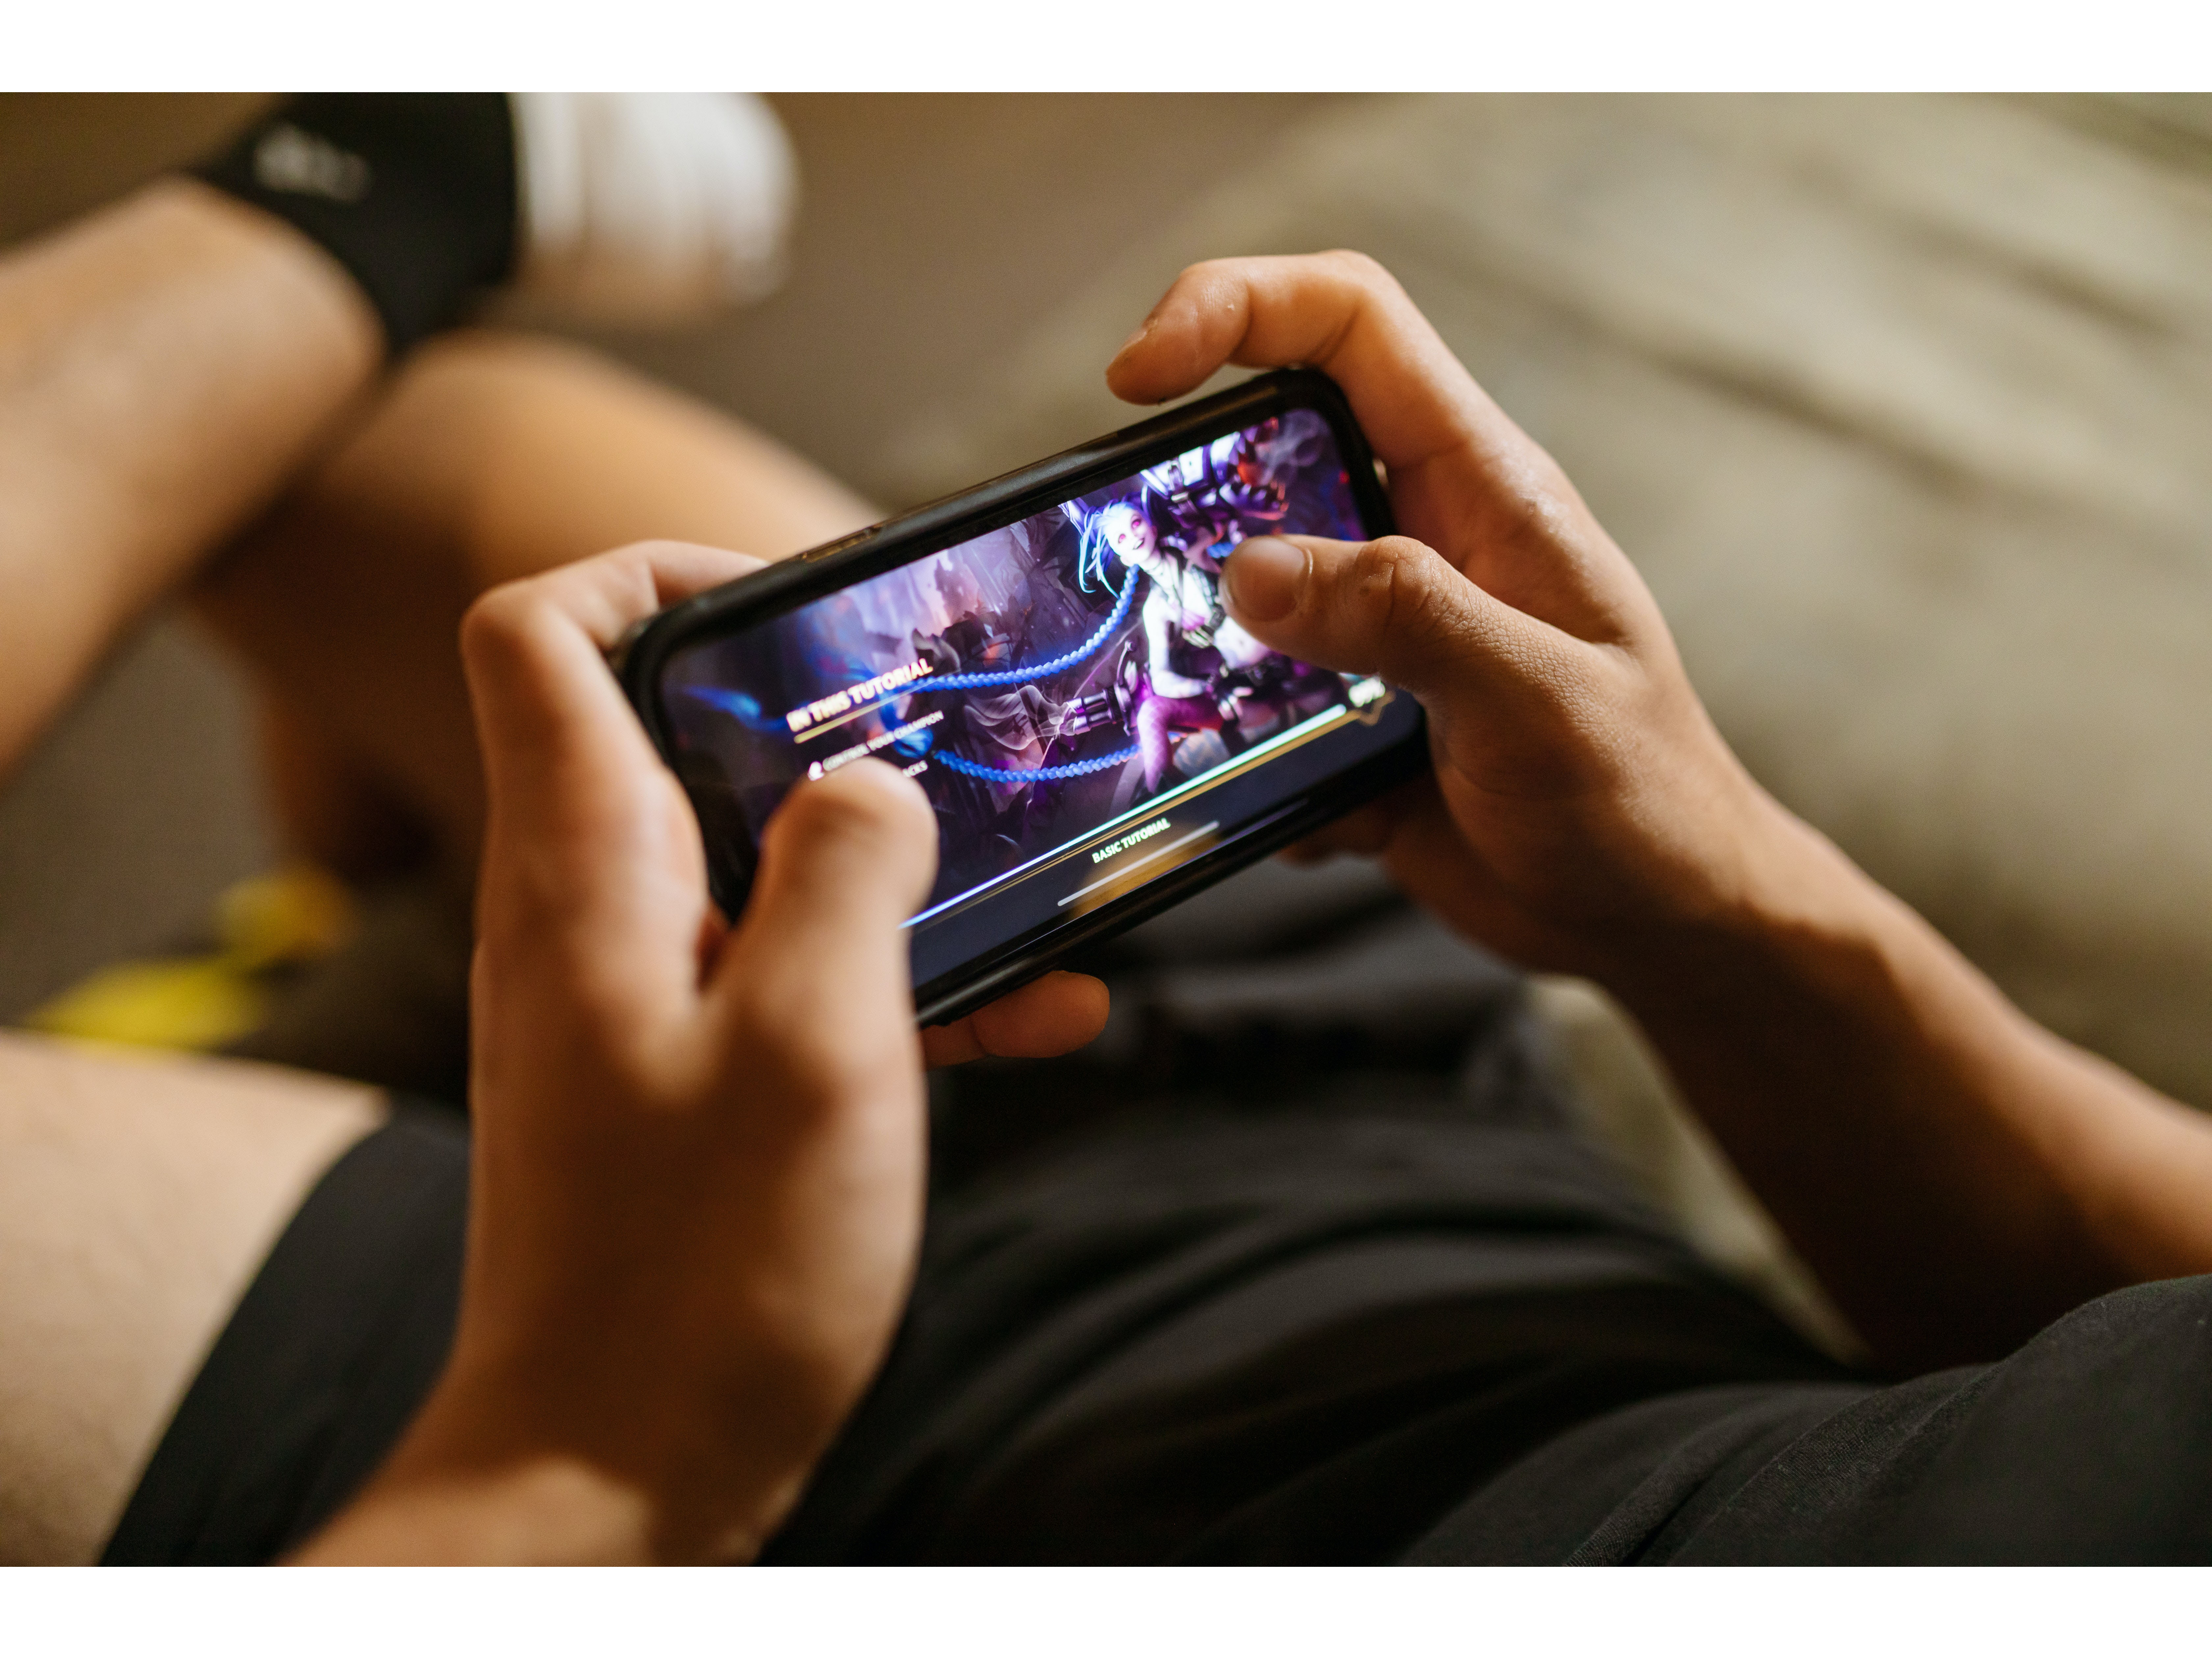 Tremendous upsurge in App sharing and mobile gaming during Eid in the Middle East